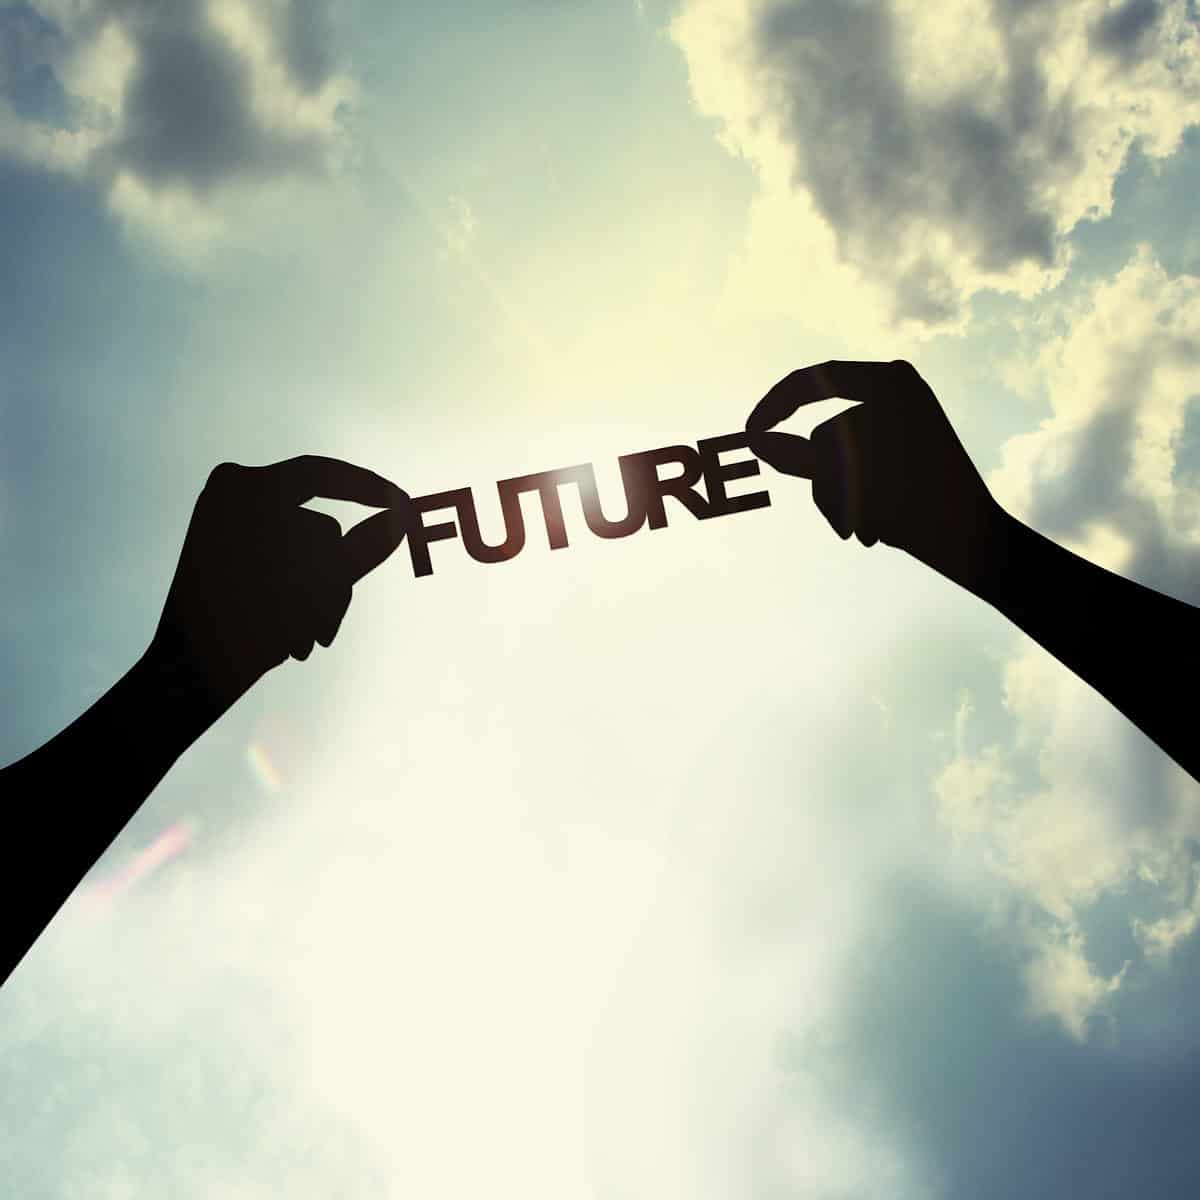 The background of this frame is a bright partly cloudy sky, against which I left arm in the left frame and a right arm in the right frame  in shadow, are visible holding the word future in all uppercase letters that has been cut out of paper or card stock. All of the letters are connected and are about 2 inches tall. 